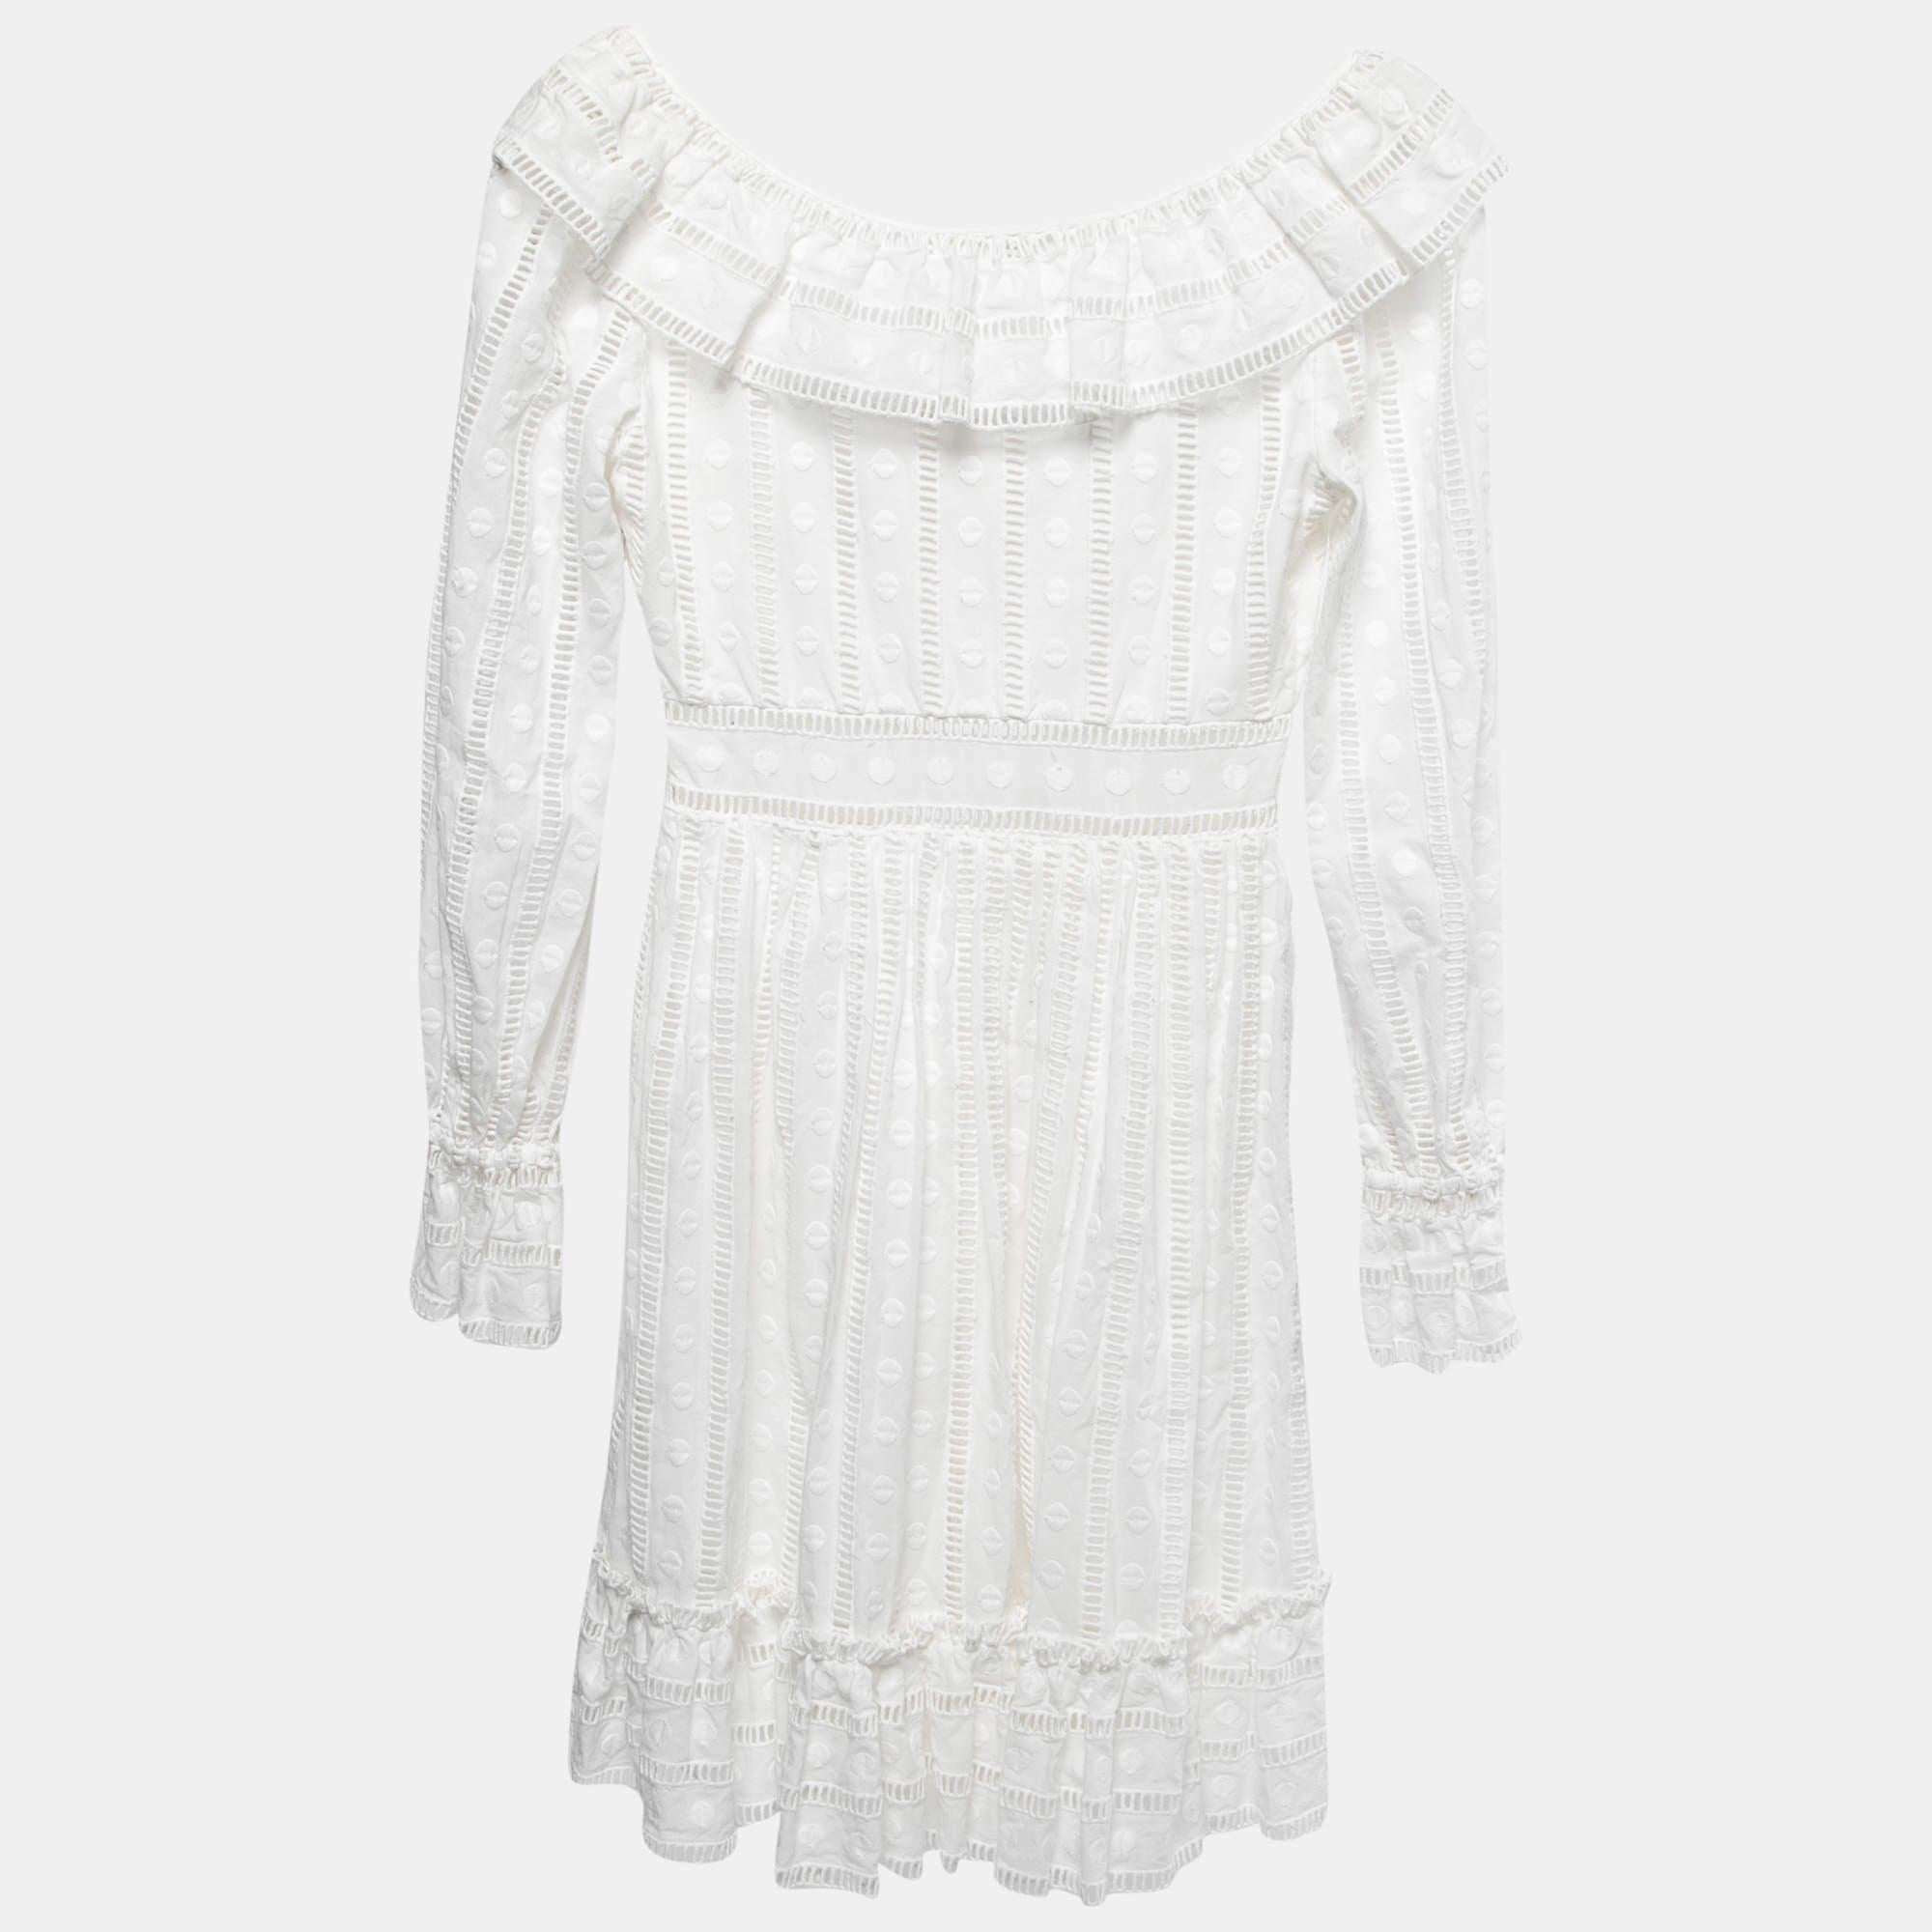 Effortlessly made into a chic design, this Zimmermann white dress is easy to wear and easy to accessorize. Tailored beautifully, the dress is sure to remain a favorite season after season.

